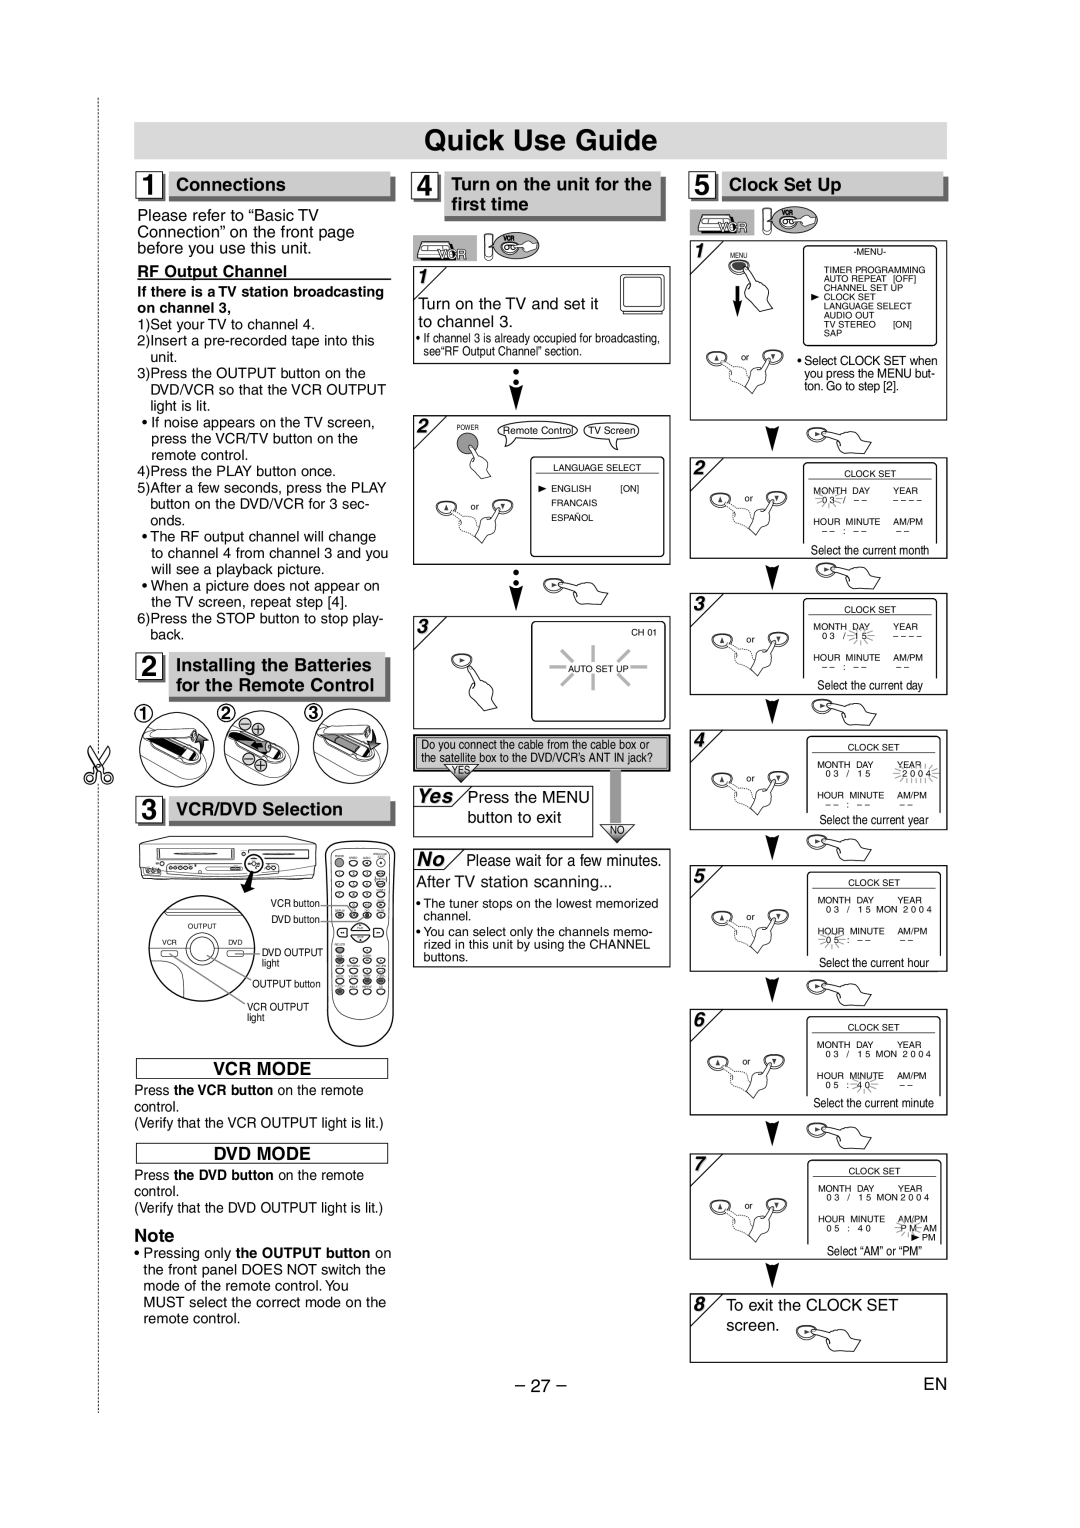 Sylvania SRD4900 Quick Use Guide, Connections, Installing the Batteries, for the Remote Control, 3 VCR/DVD Selection 